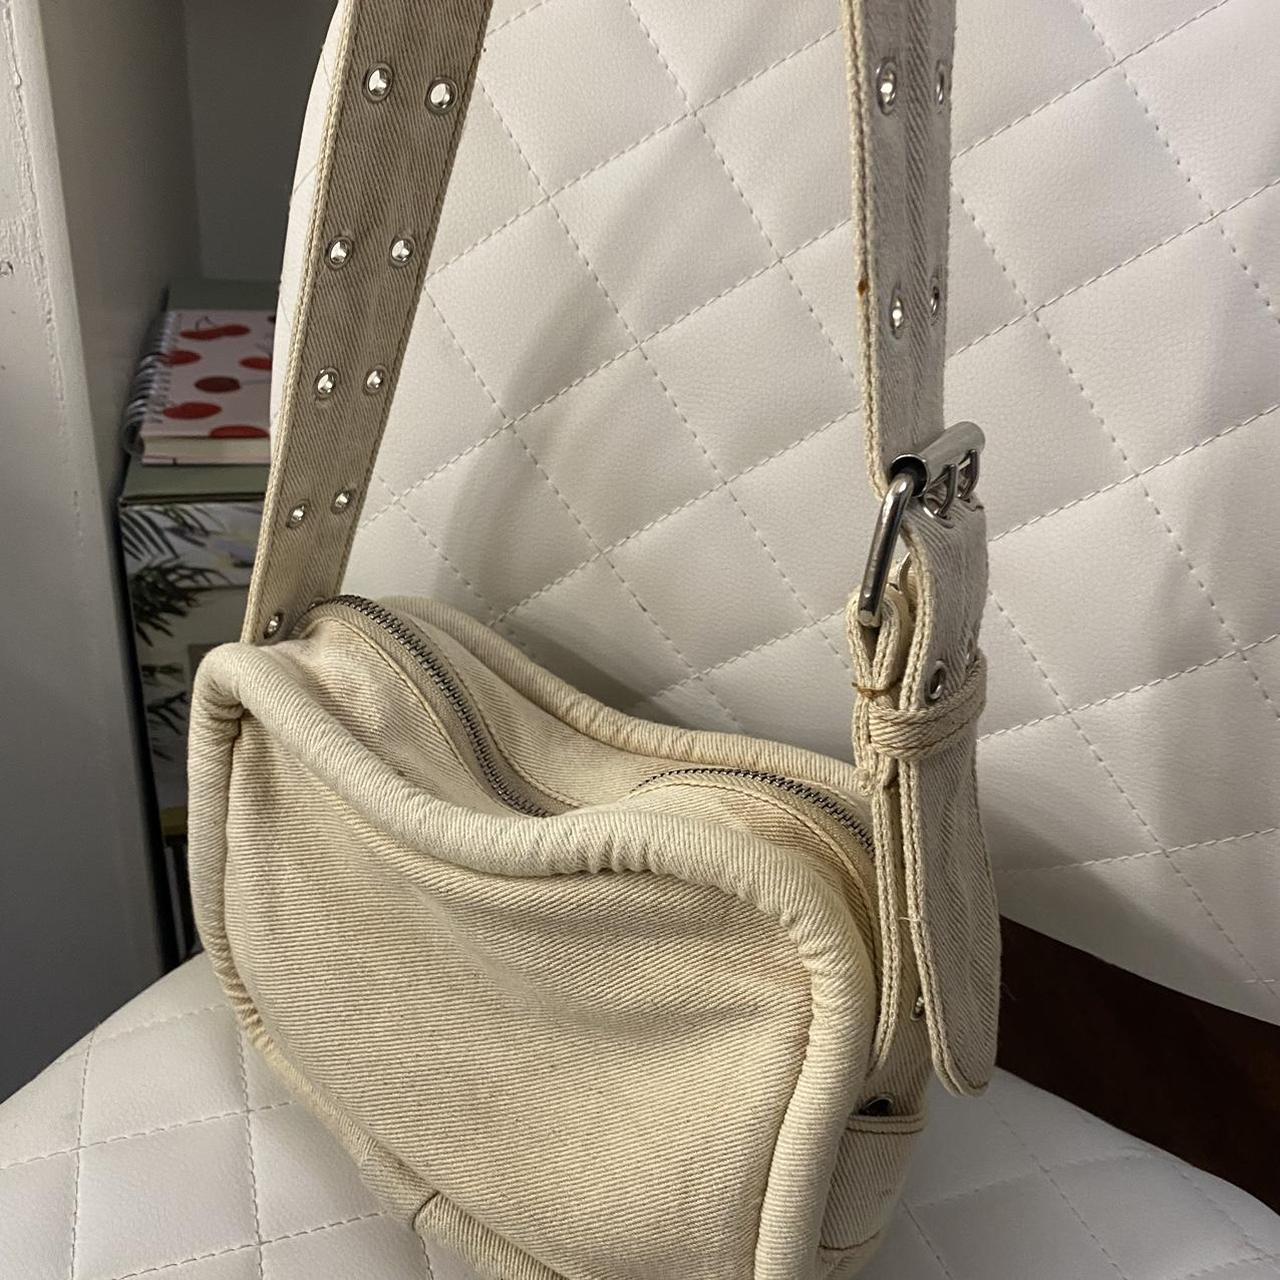 Urban Outfitters Women's Cream Bag (2)